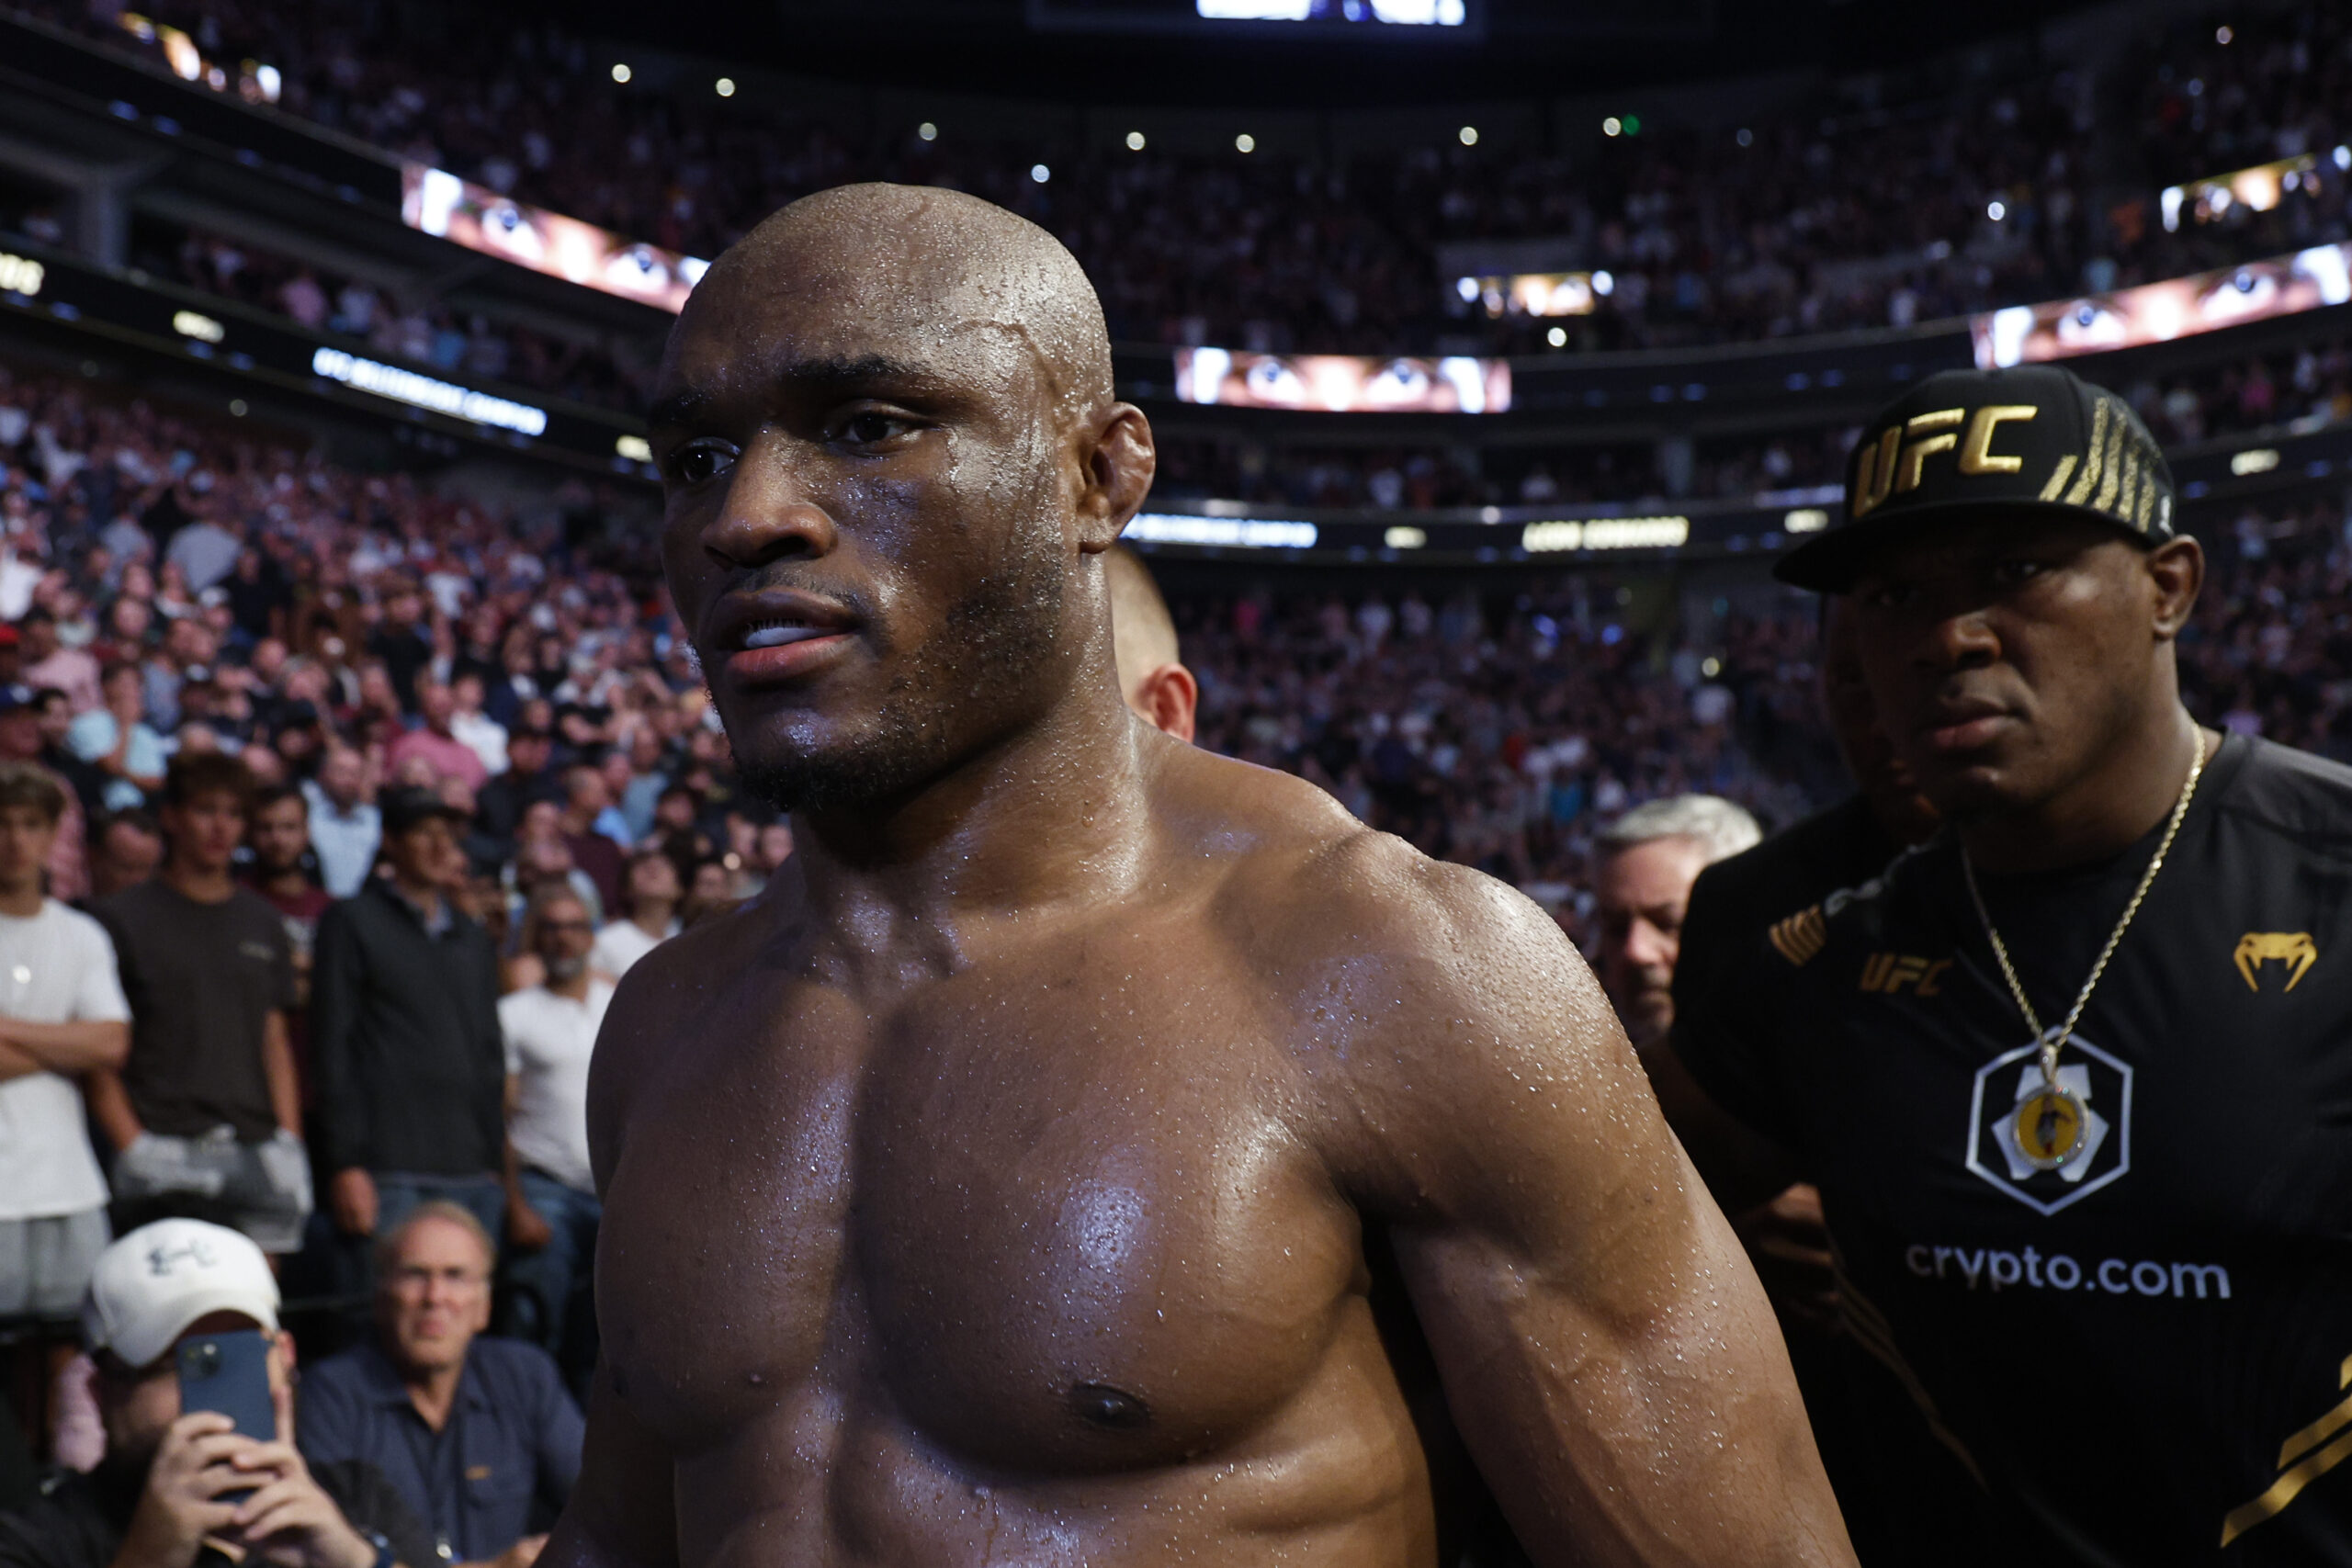 Dana White: Kamaru Usman told me ‘weight has been lifted’ after losing UFC title